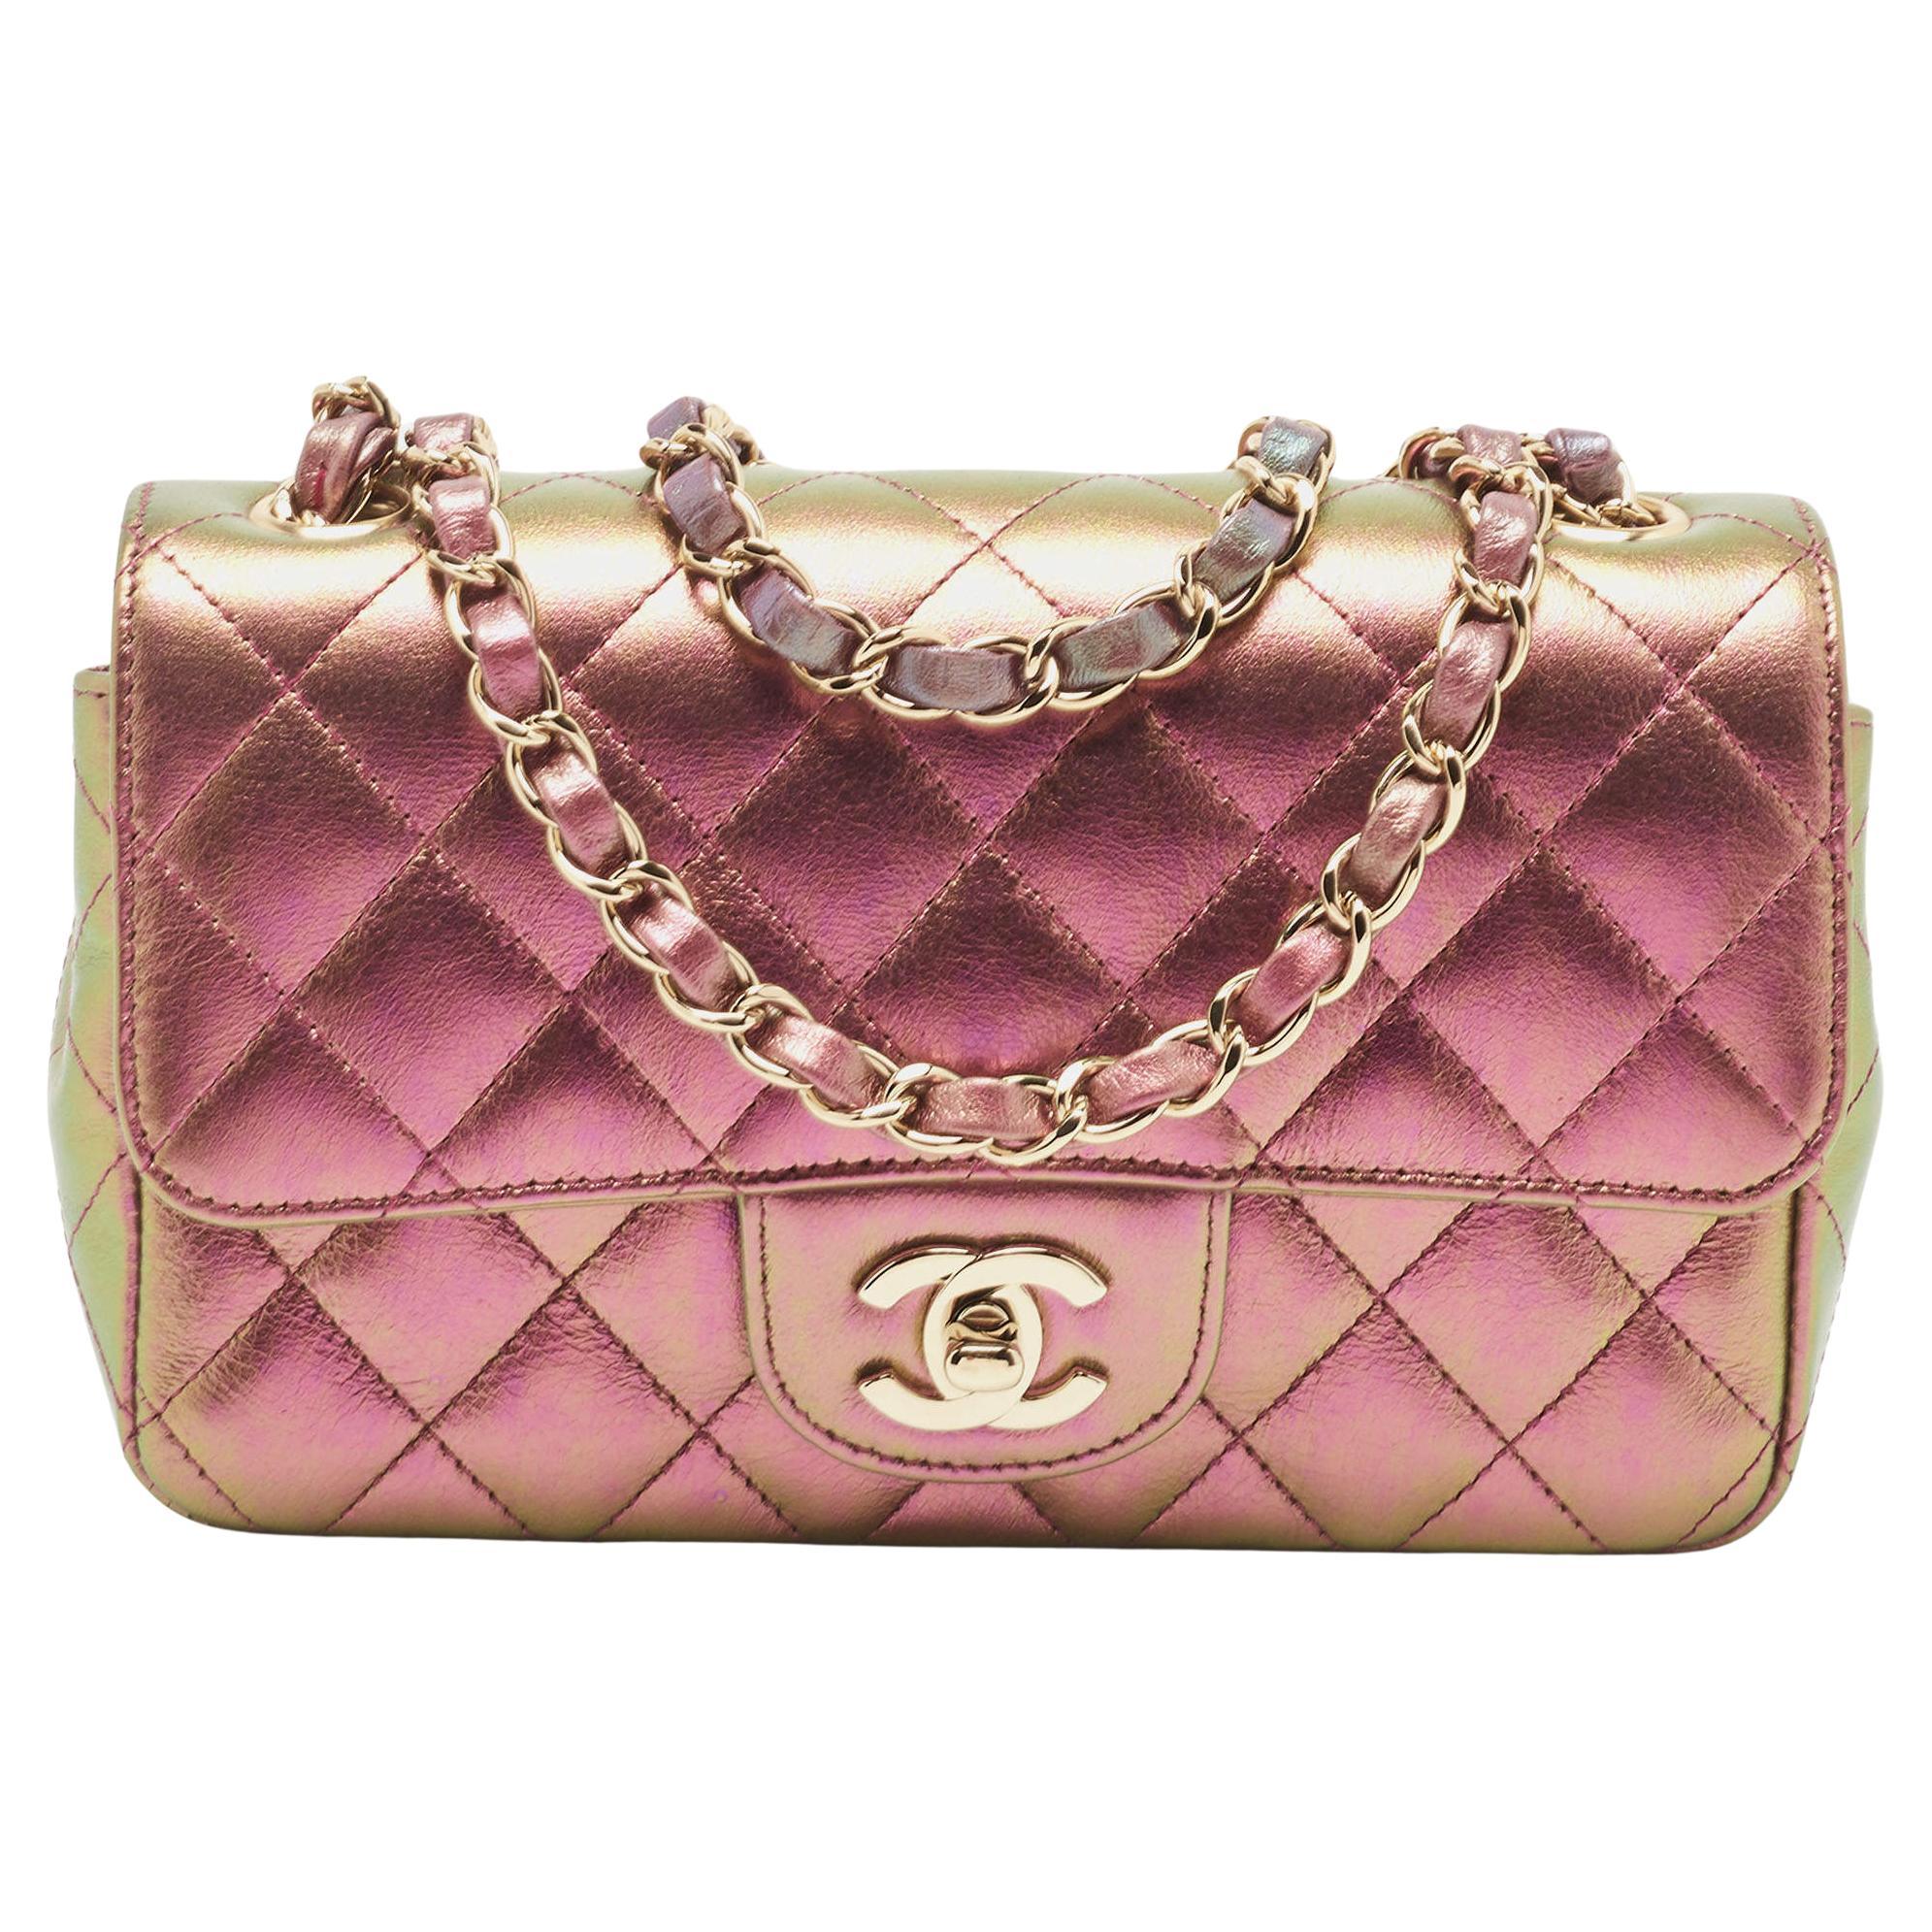 Chanel Iridescent Quilted Leather New Mini Classic Flap Bag